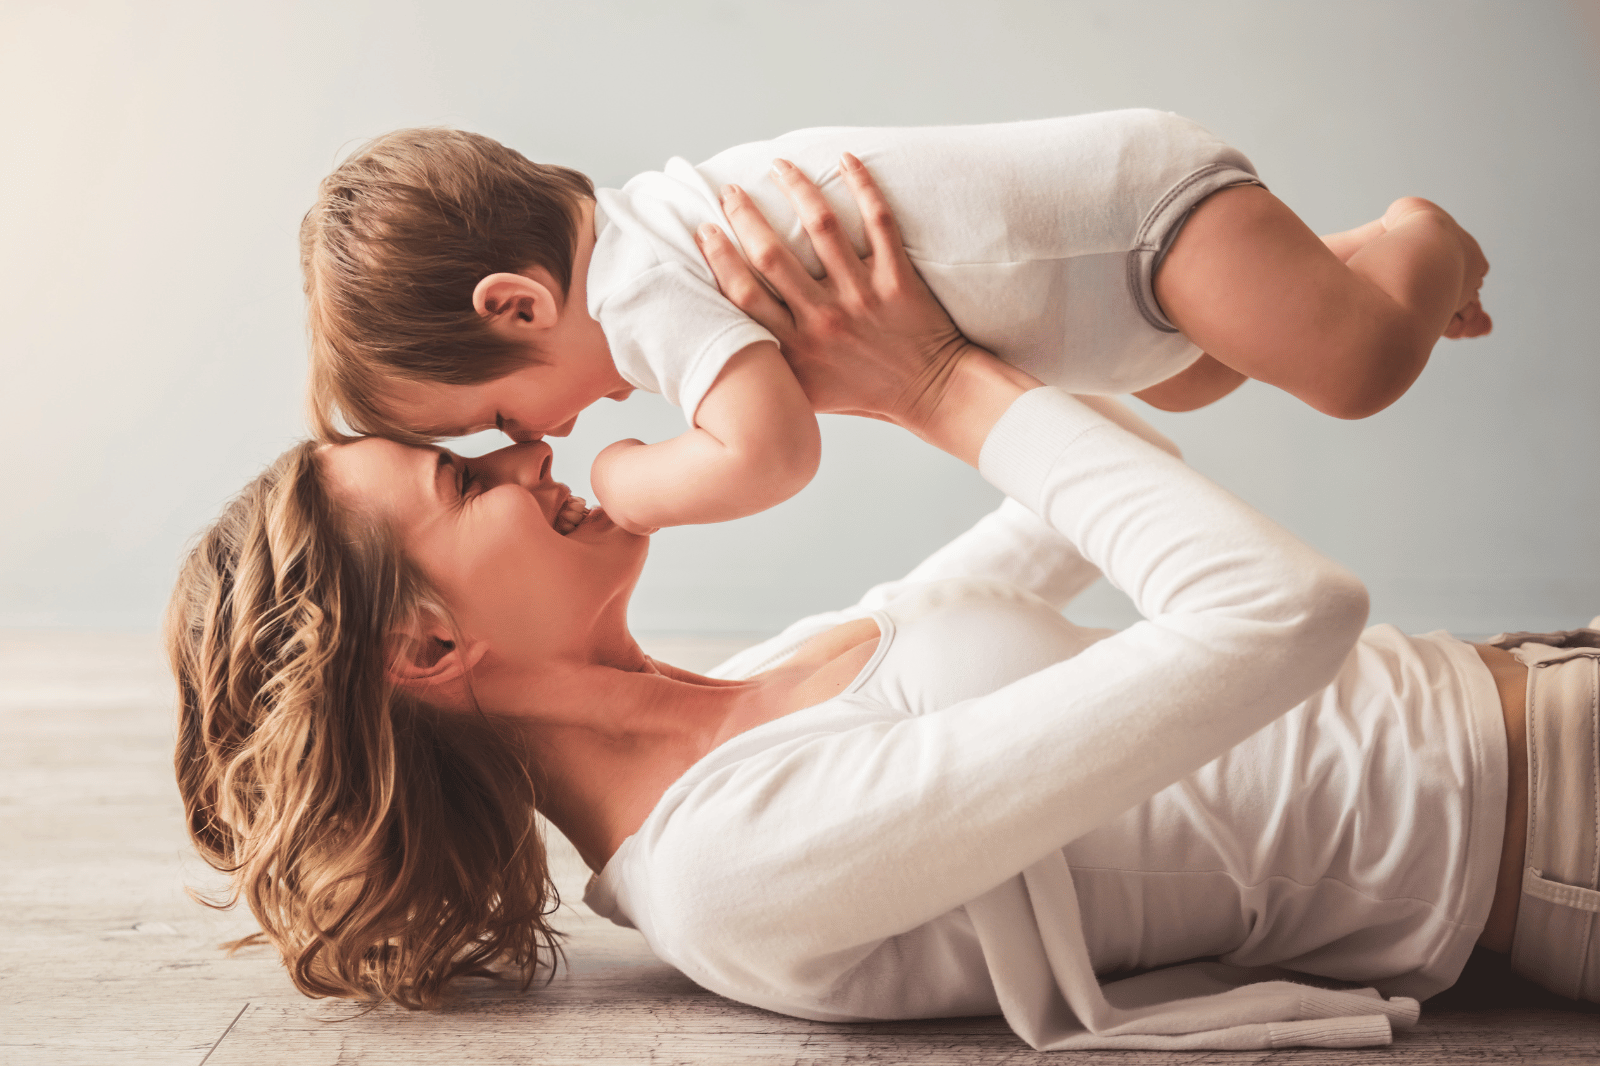 What exactly is a mommy makeover?